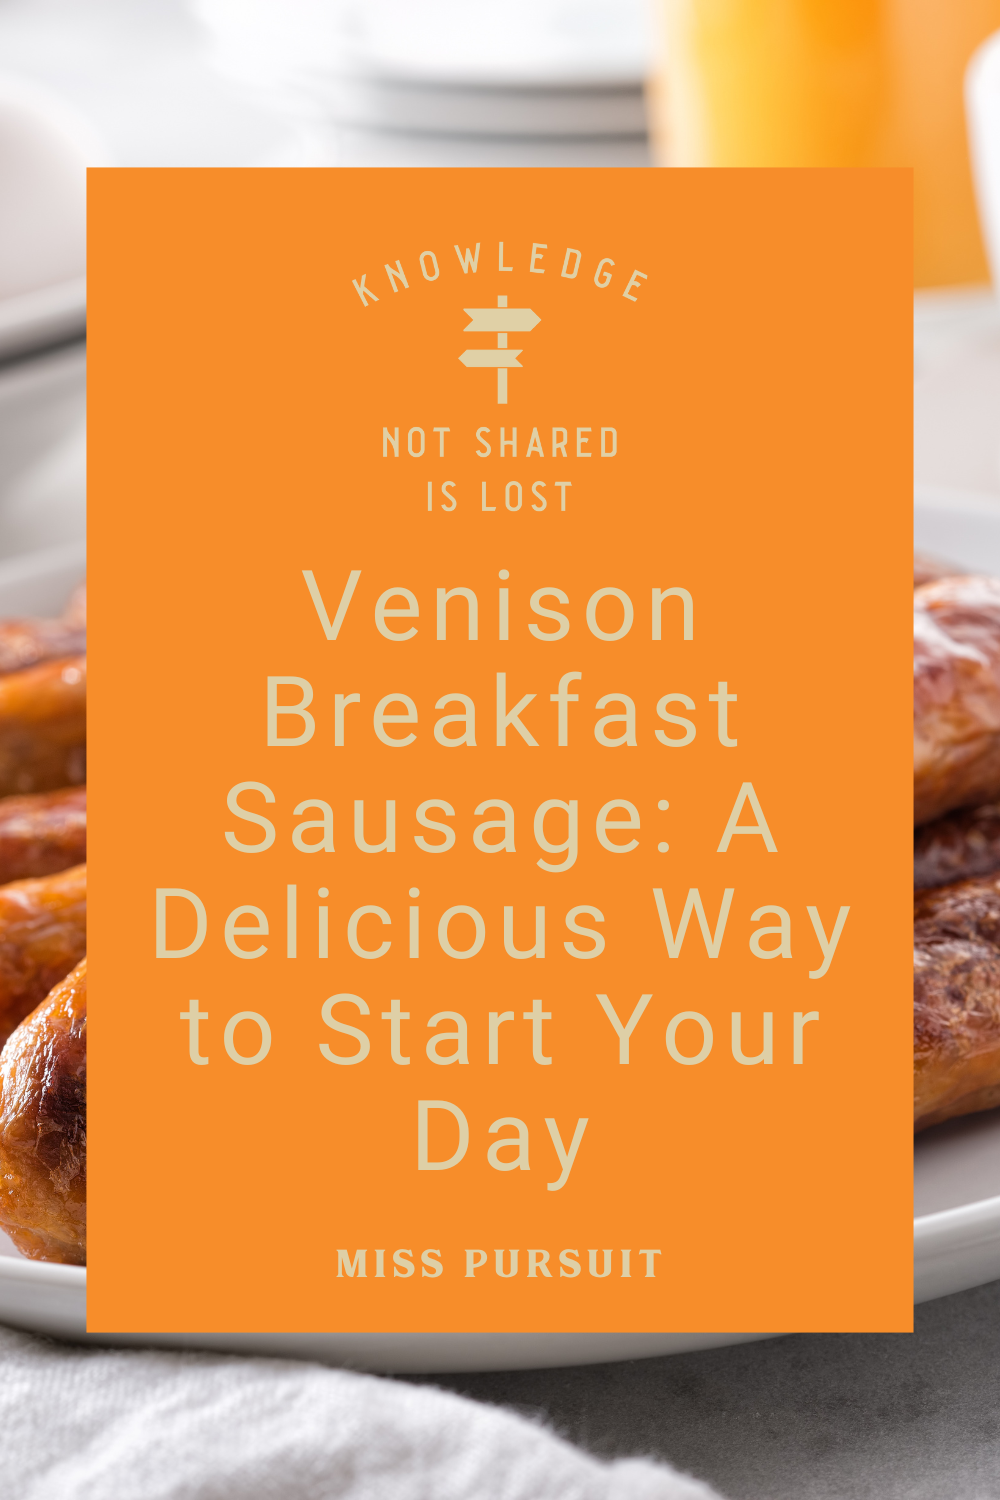 Venison Breakfast Sausage: A Delicious Way to Start Your Day